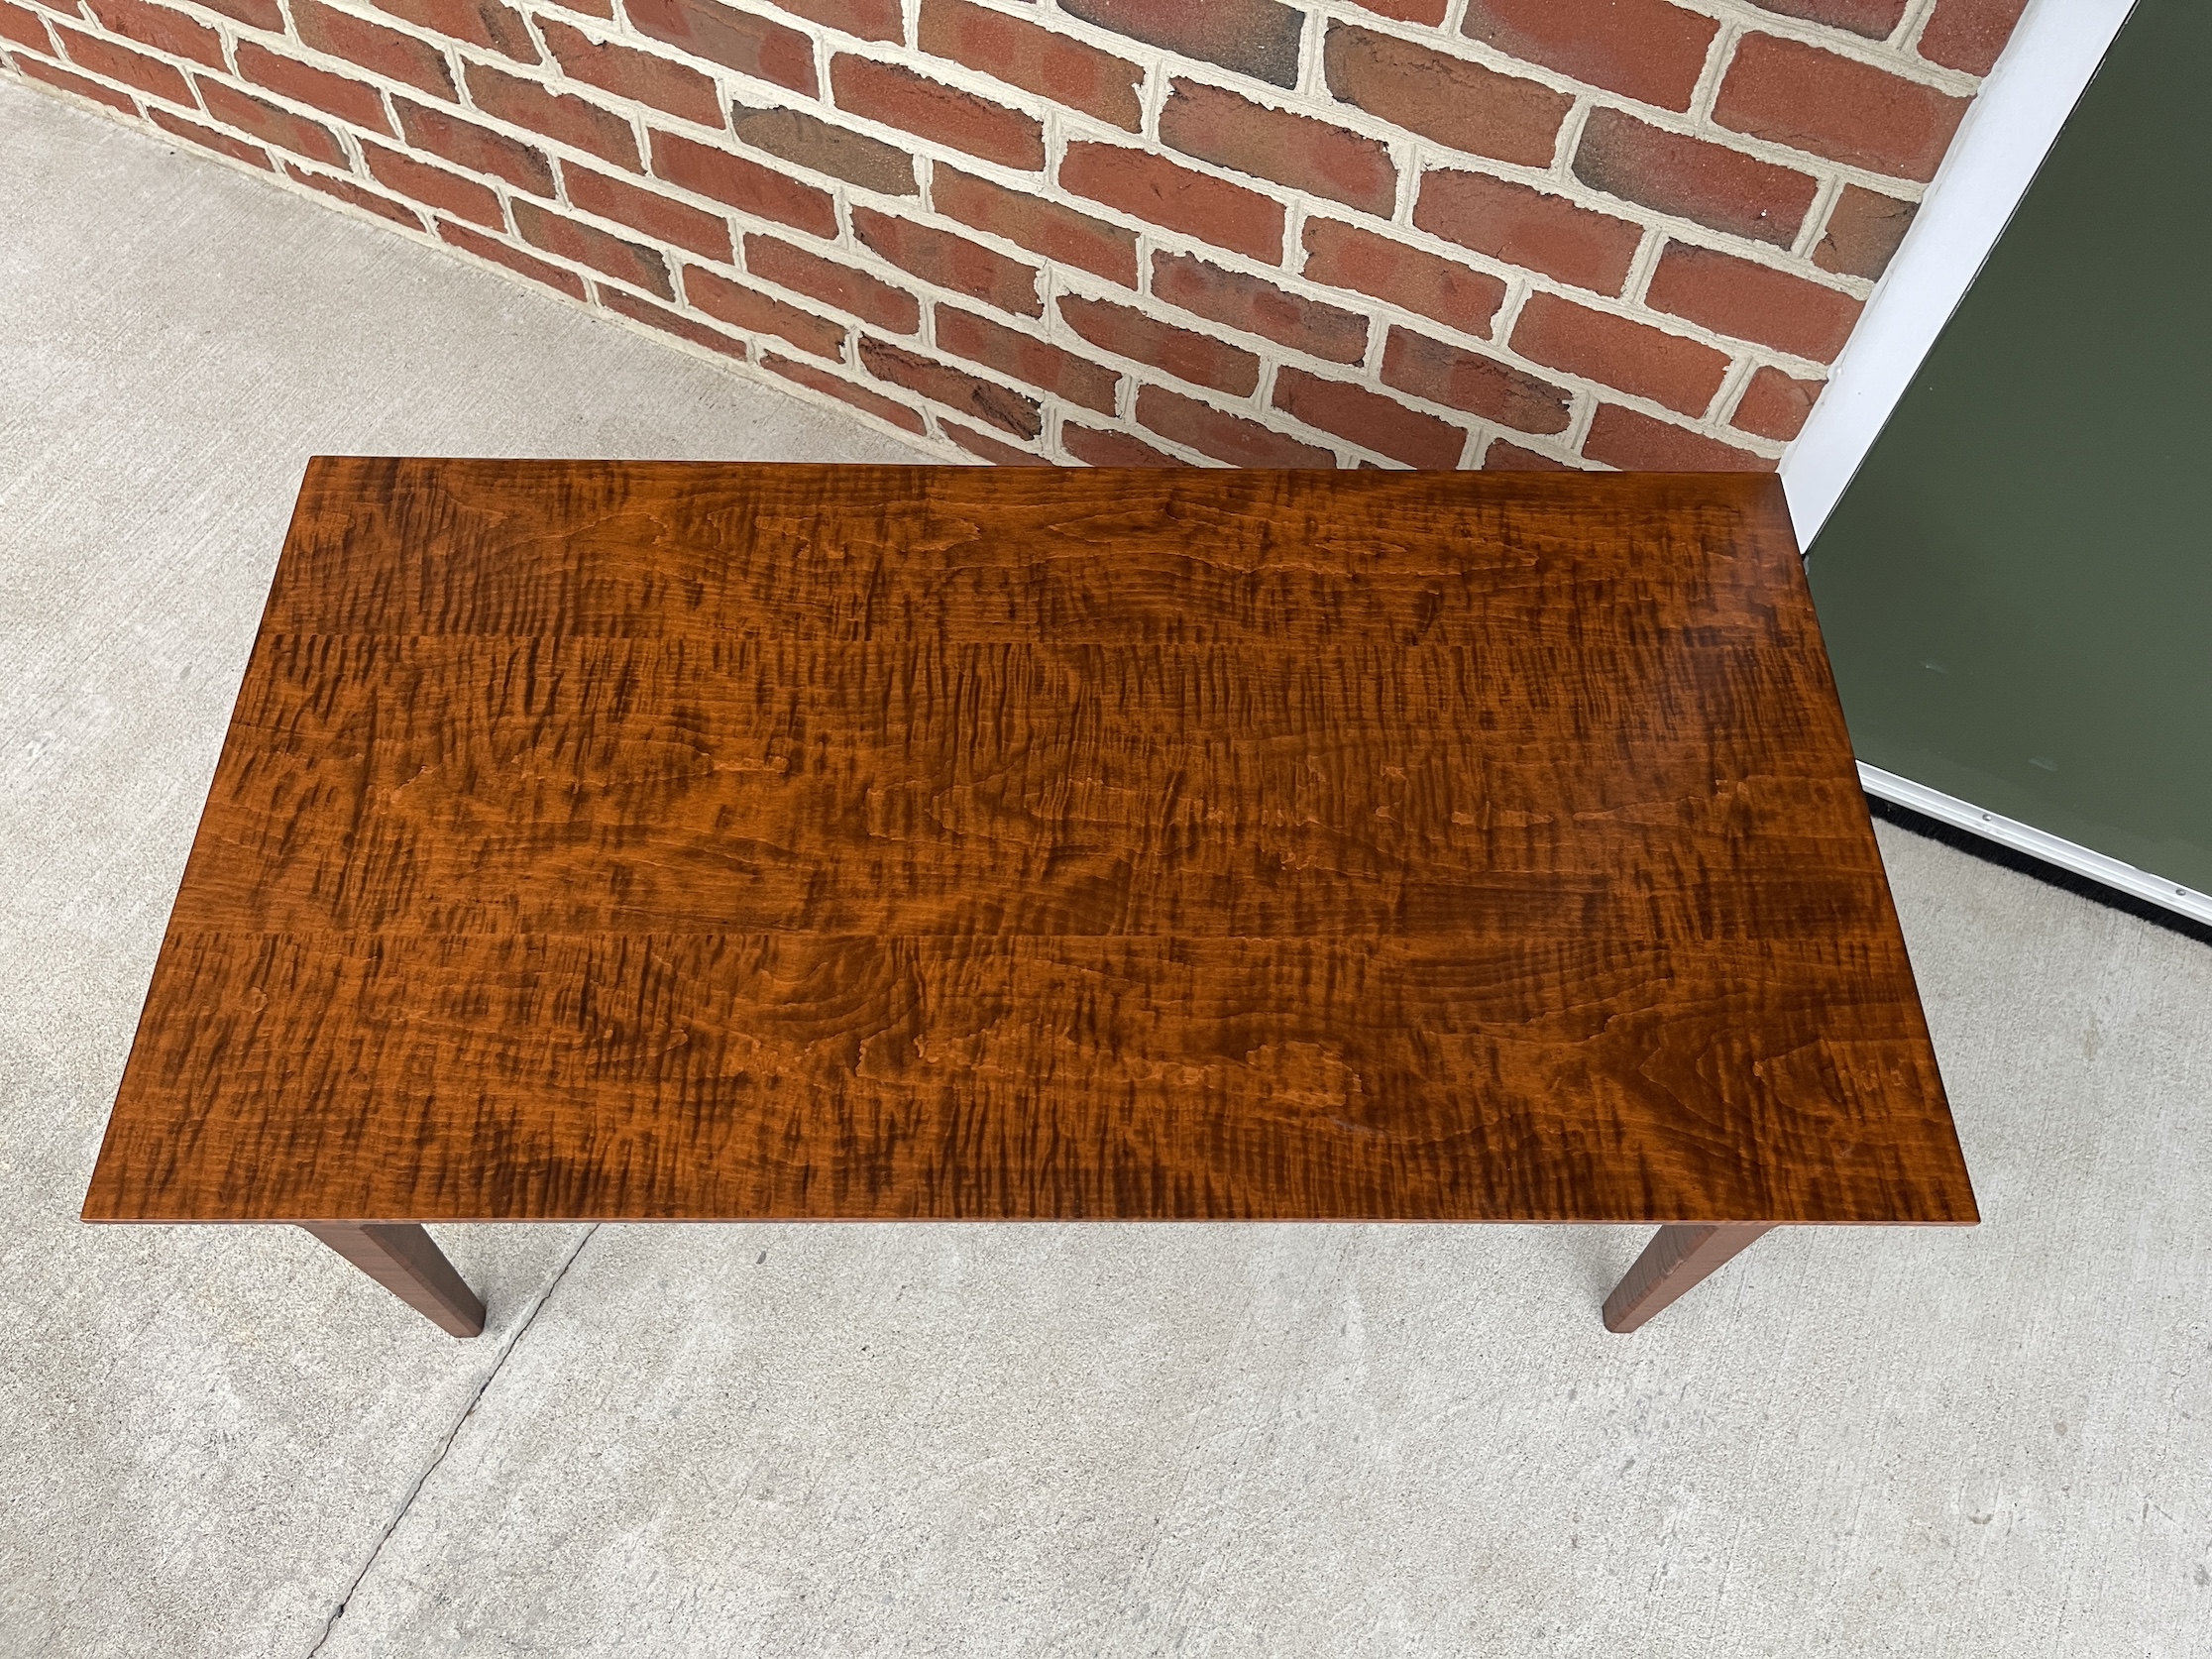 Pennsylvania Made Tiger Maple Wood Coffee Table Image